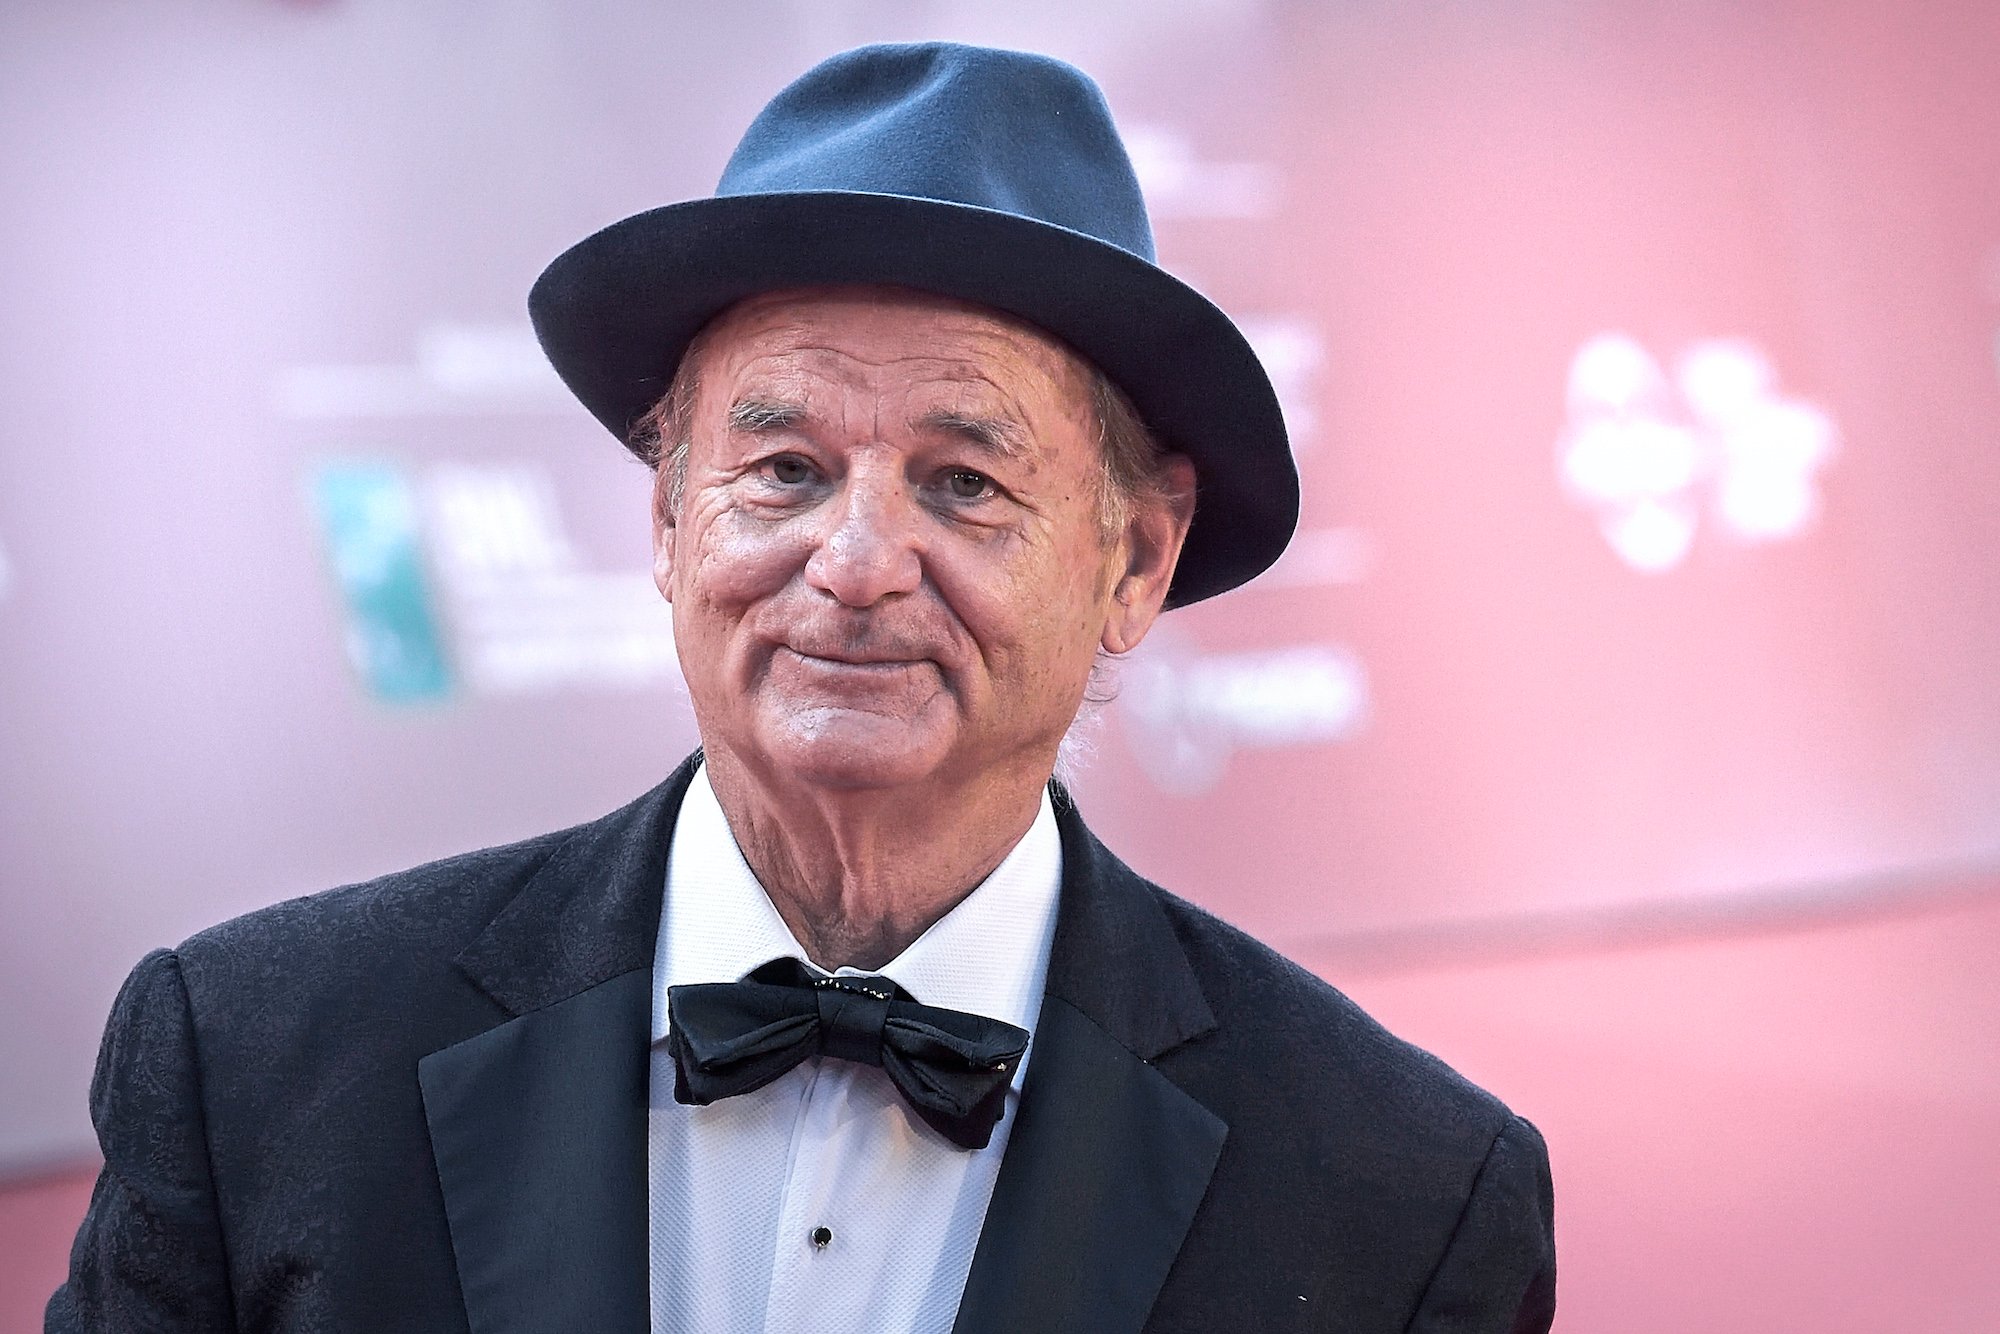 Bill Murray in a hat and tux